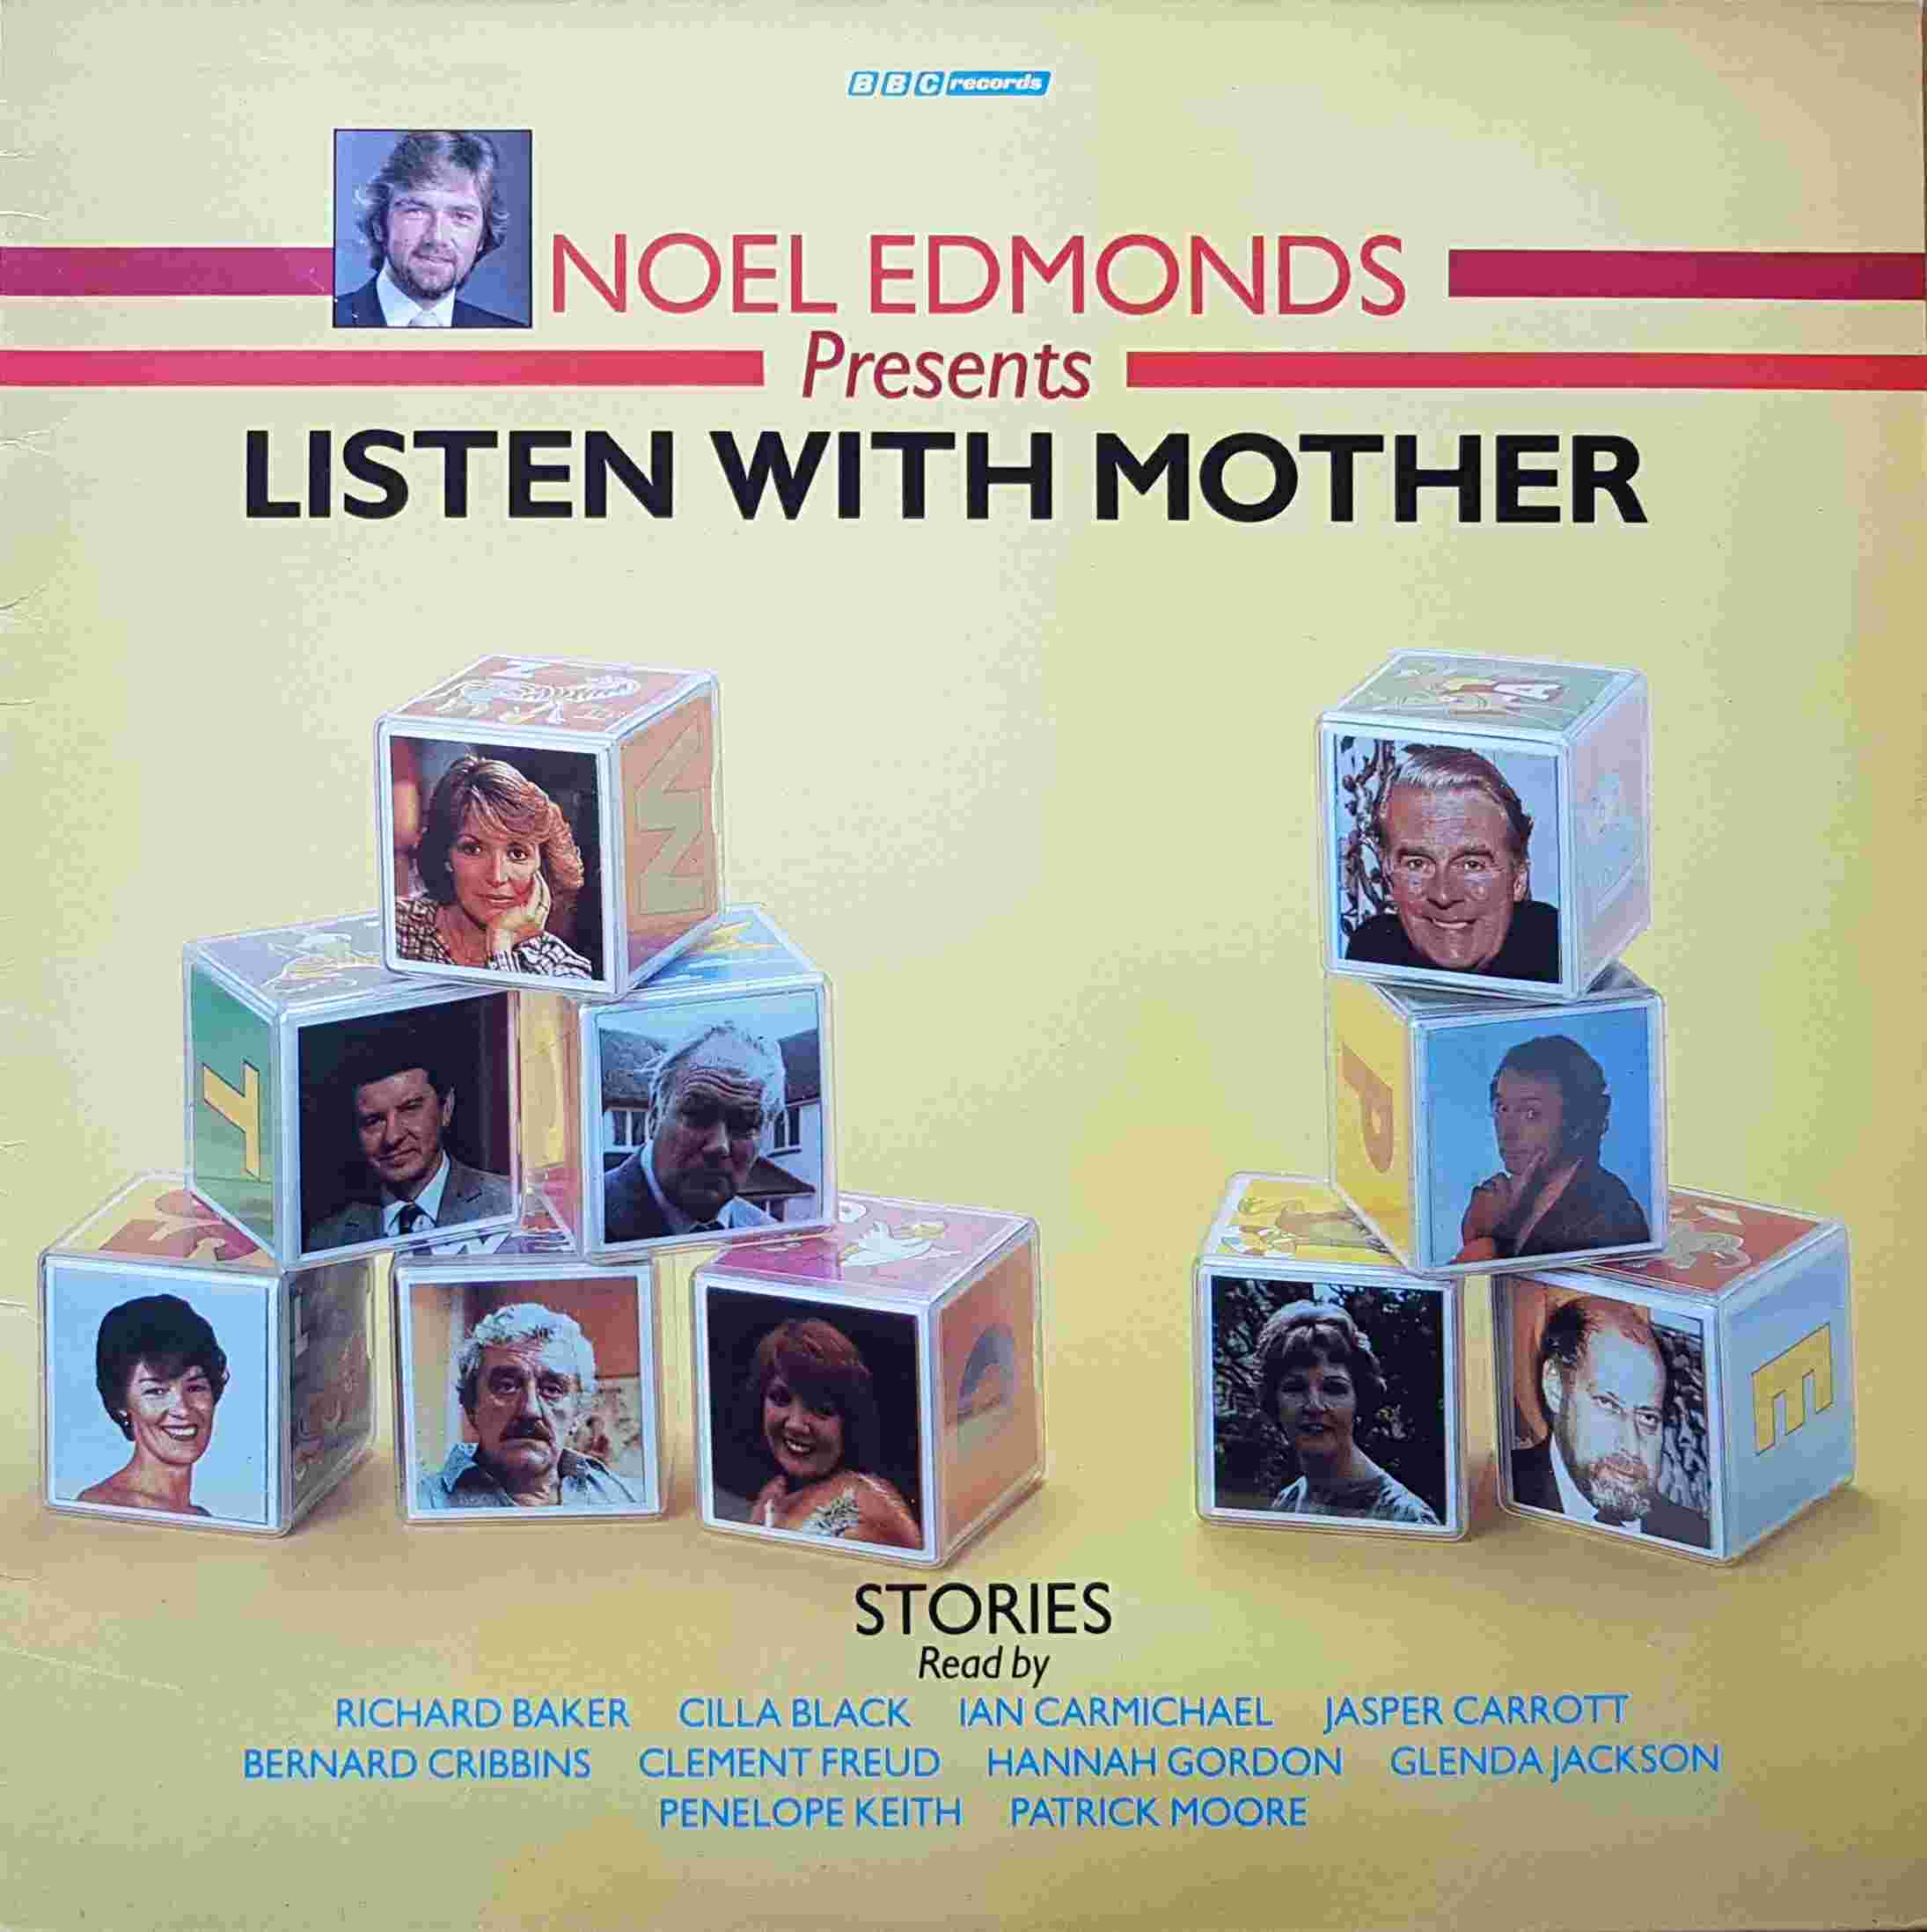 Picture of REC 525 Listen with mother - Noel Edmonds by artist Noel Edmonds from the BBC albums - Records and Tapes library